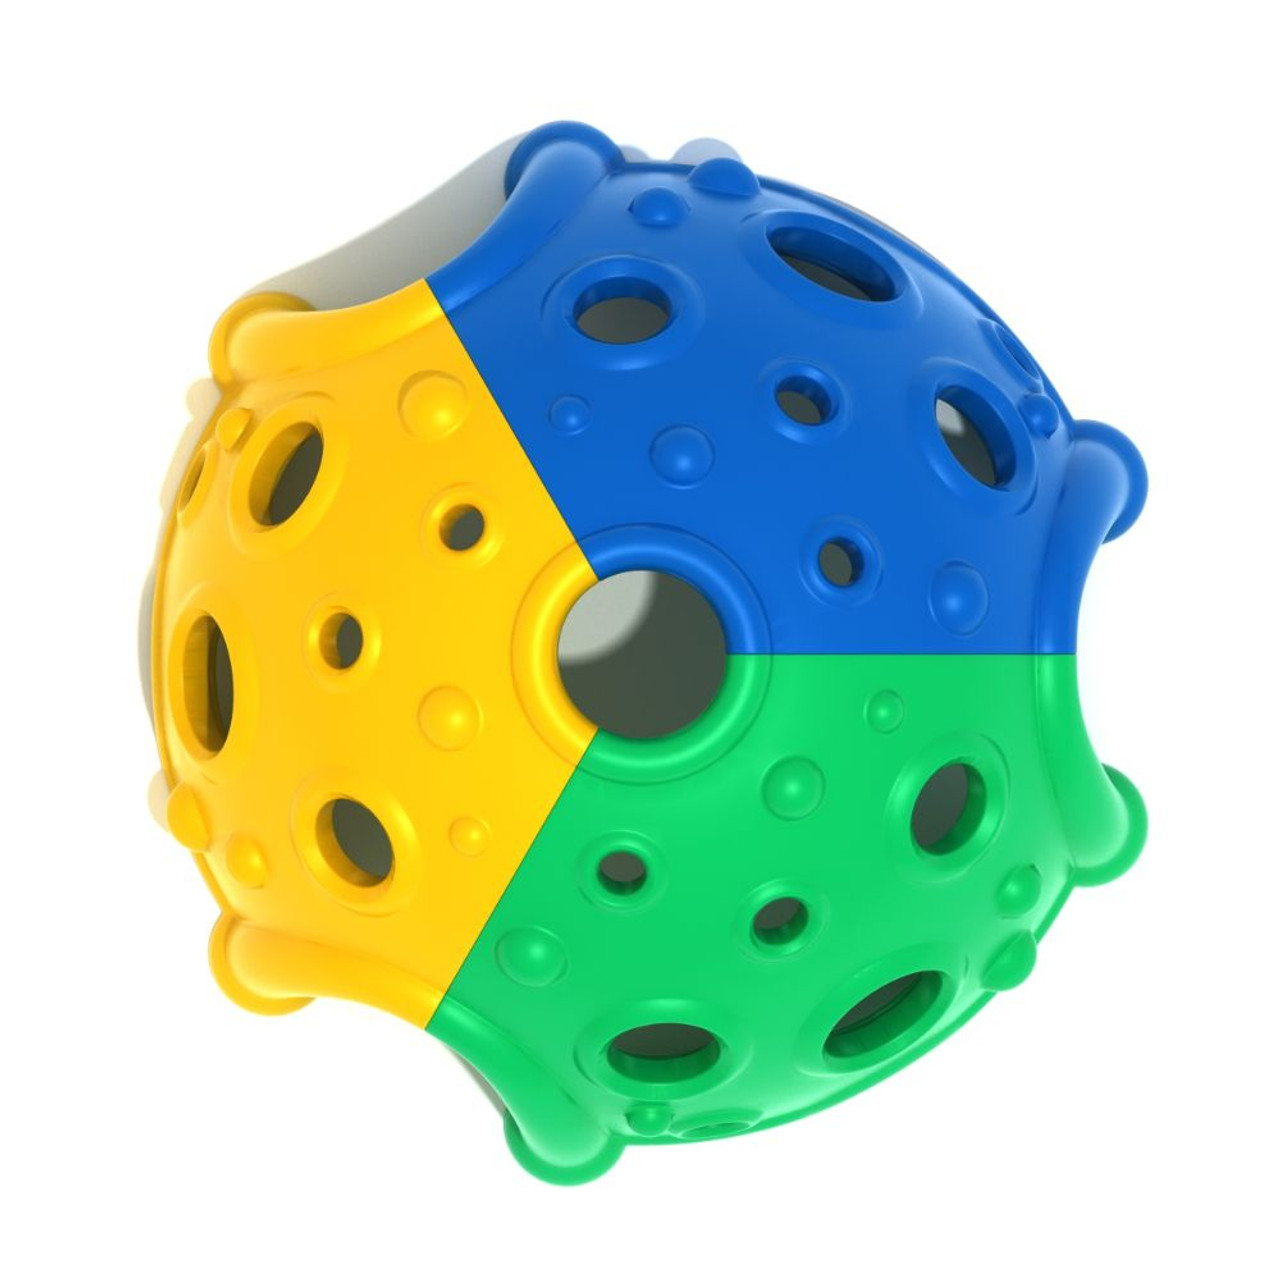 Logan's Dome Playground Climber - Top view with Yellow panel